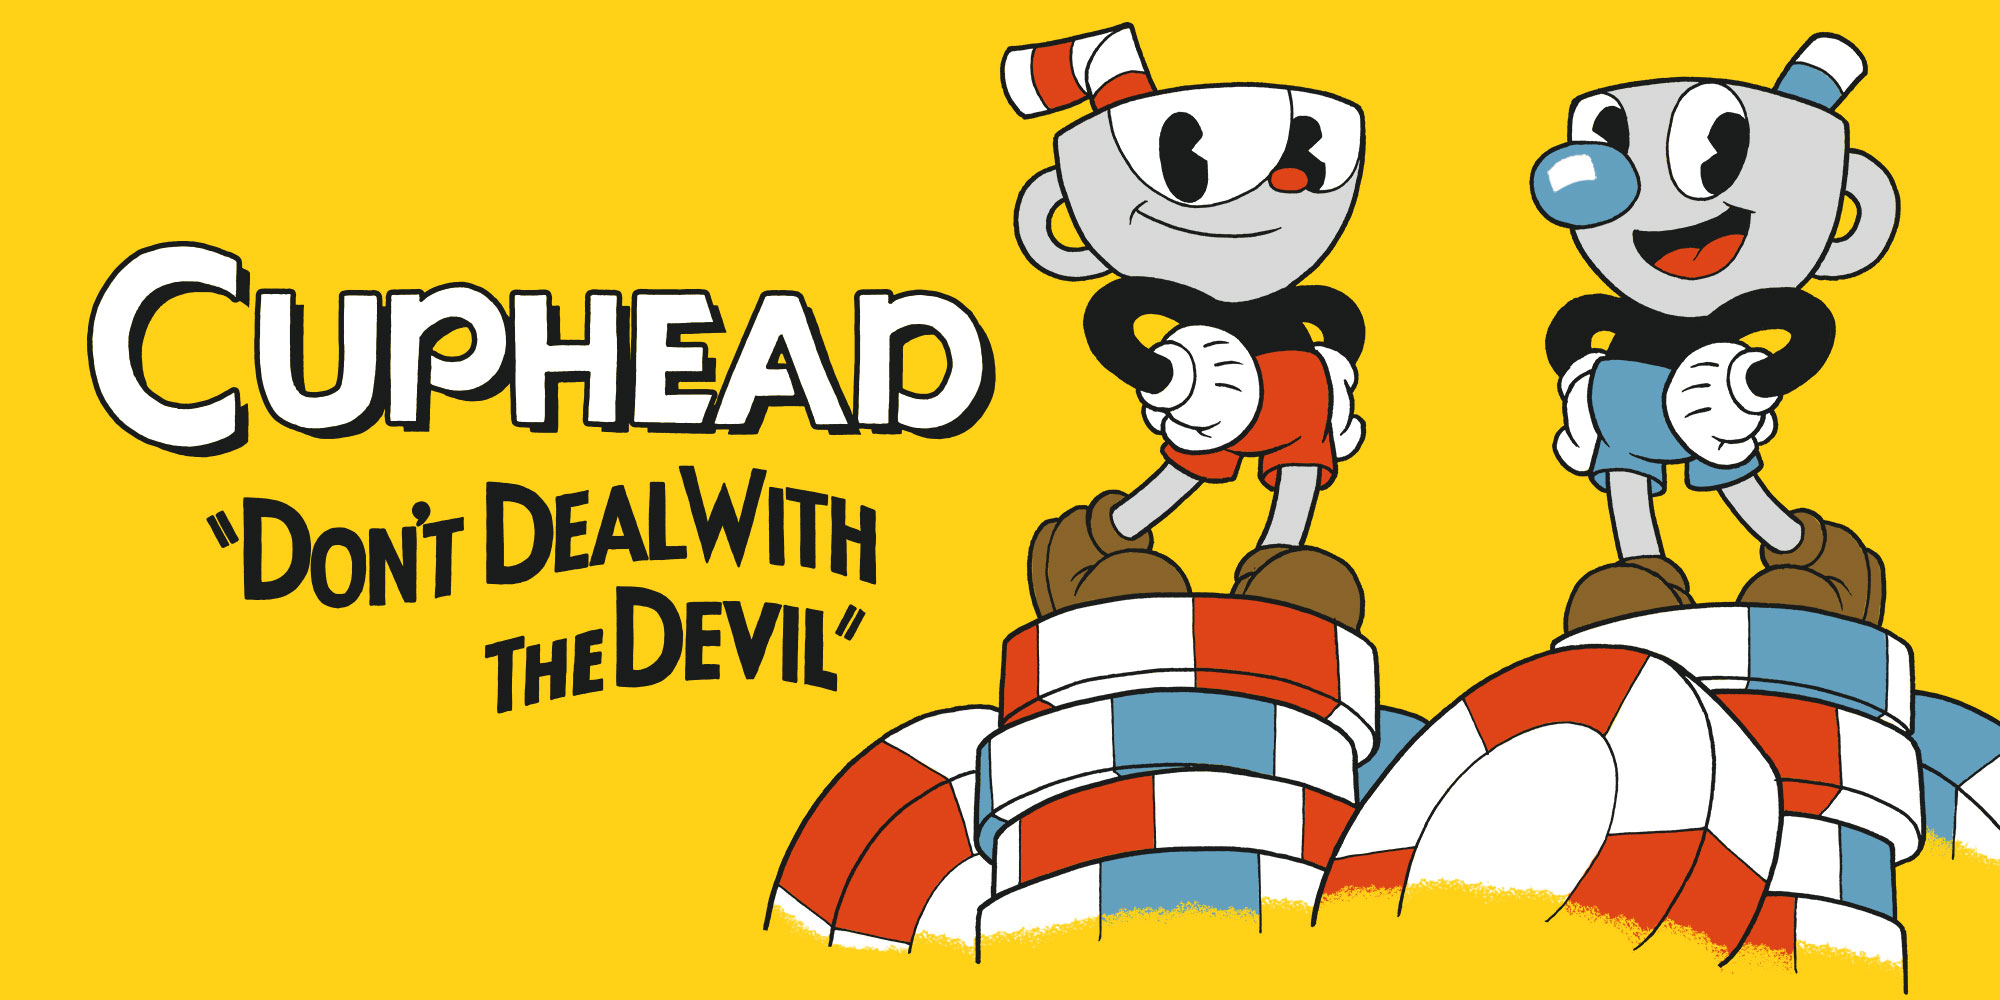 Player's favorite games: Cuphead